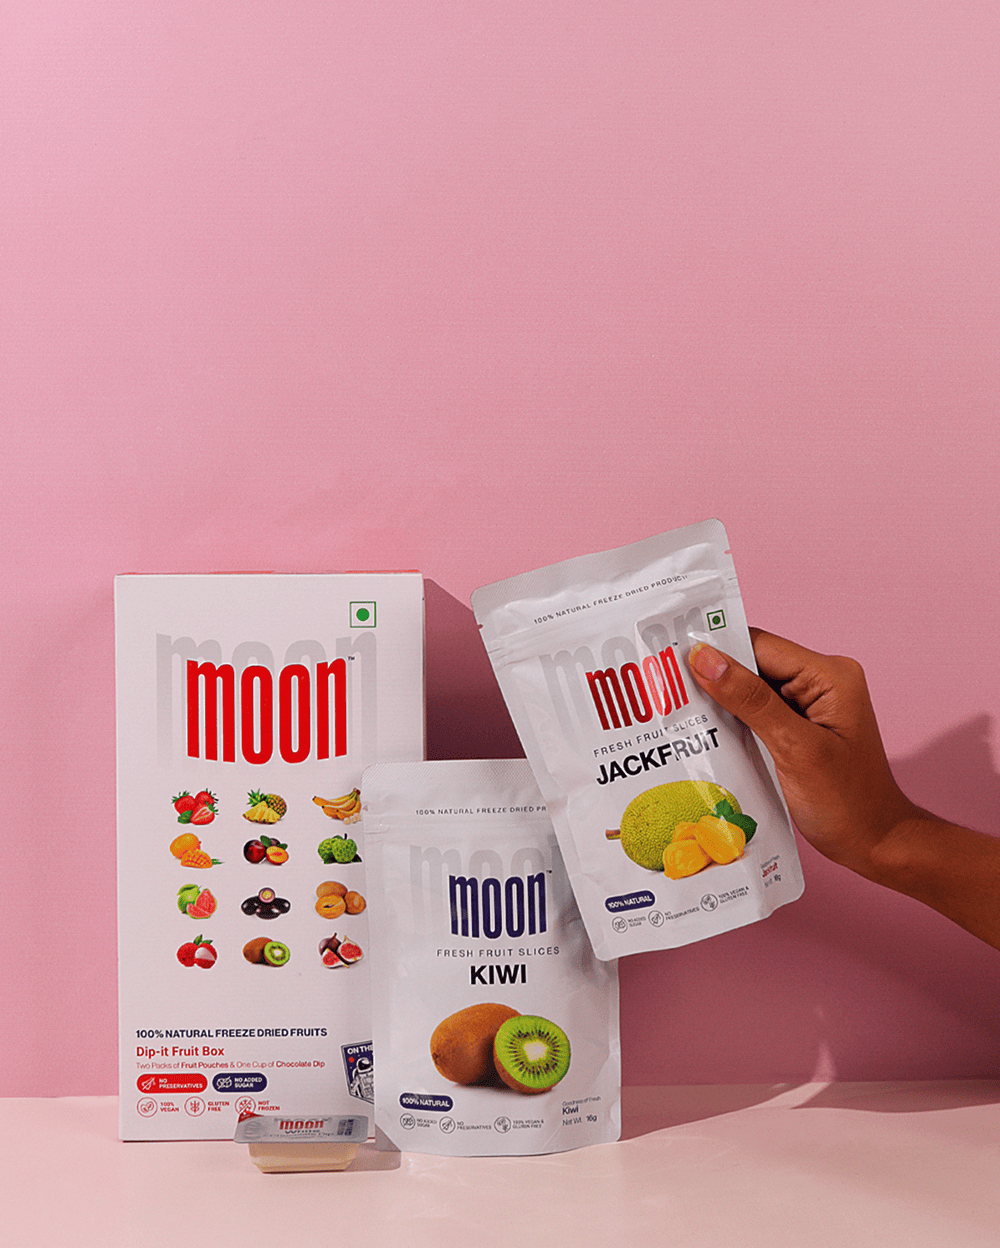 A person holding a bag of Moon Freeze Dried Fifth Quarter by MOONFREEZE FOODS PRIVATE LIMITED and a bag of kiwi.